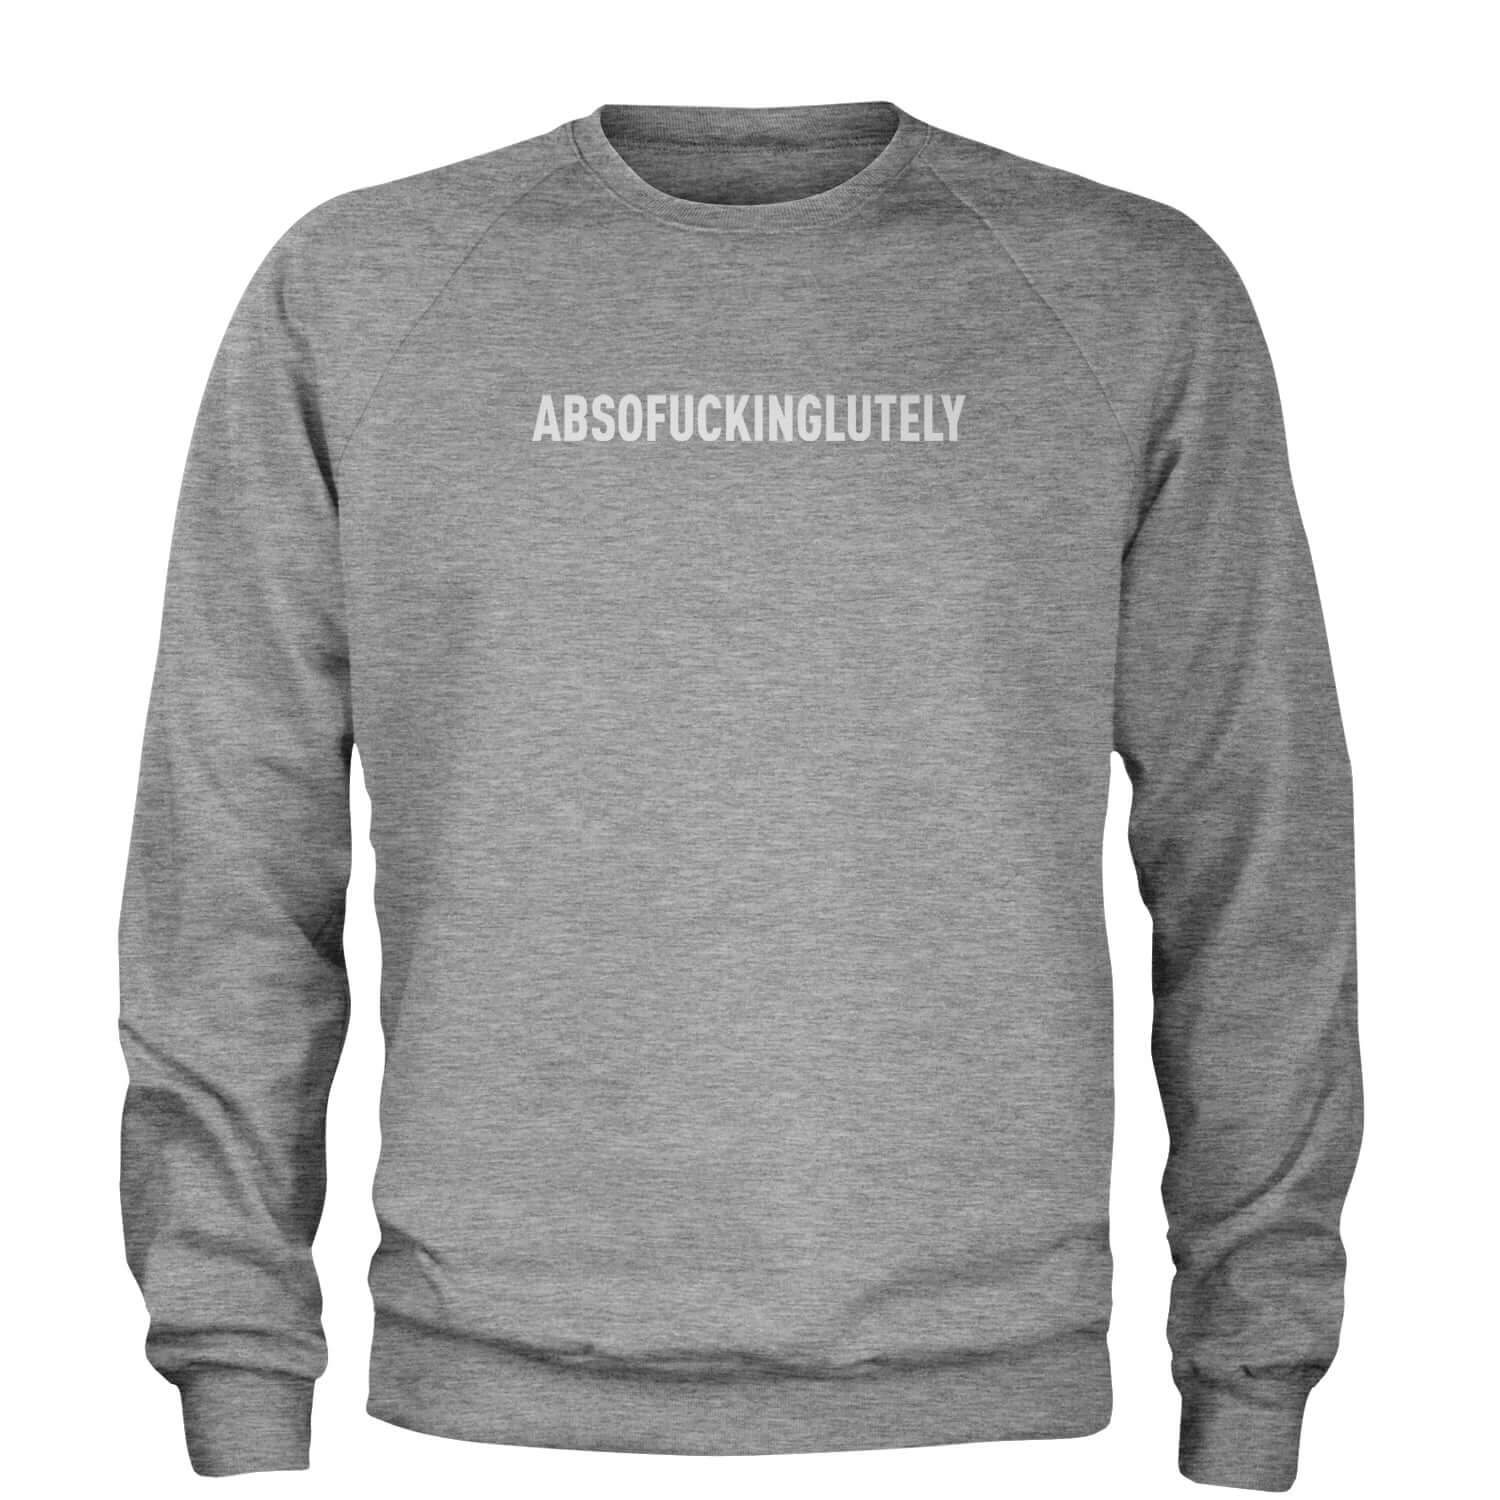 Abso f-cking lutely Adult Crewneck Sweatshirt funny, shirt by Expression Tees